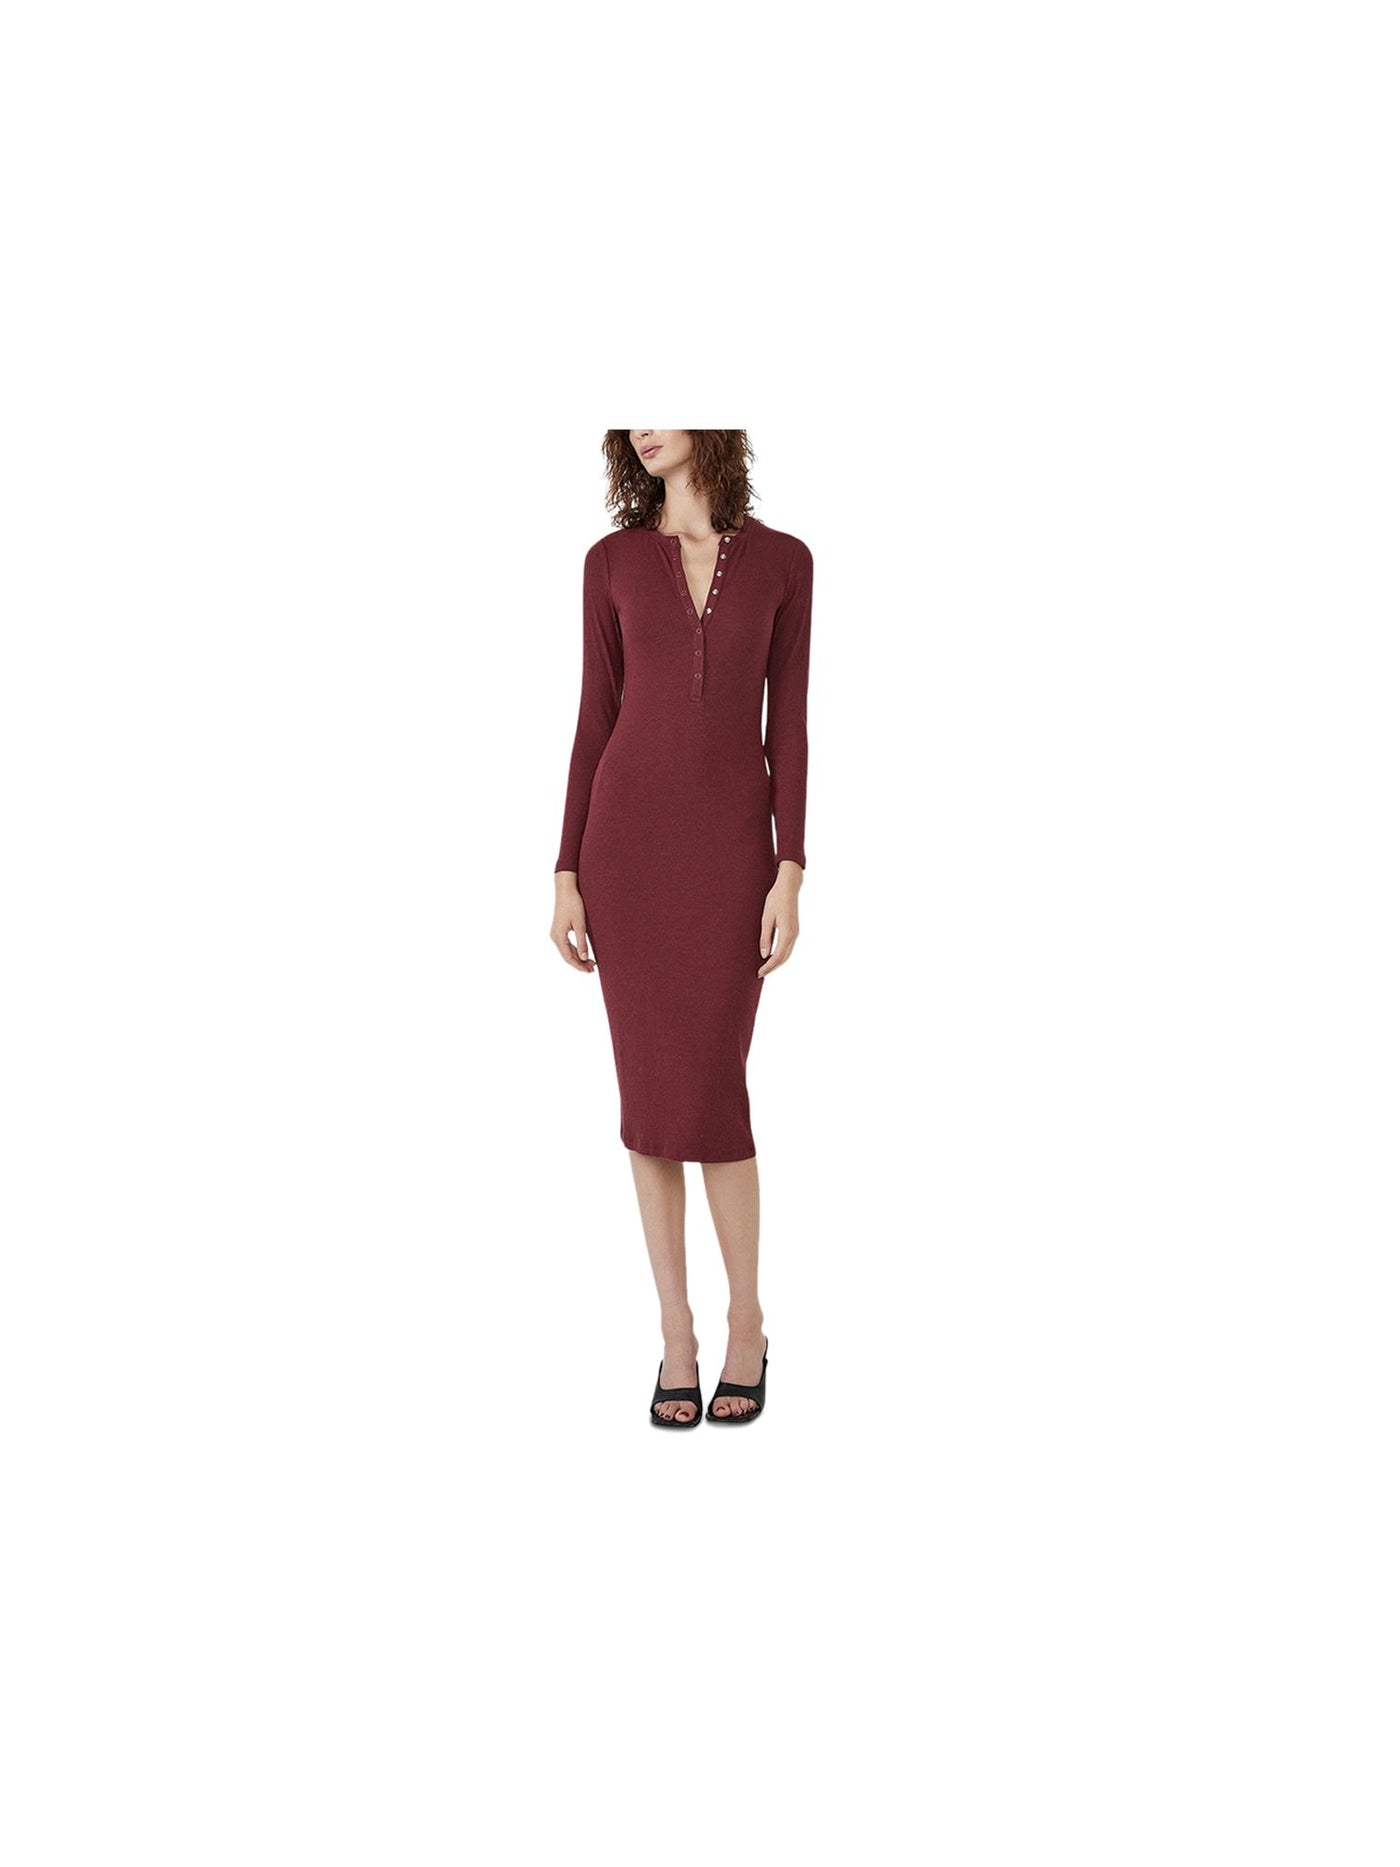 BARDOT Womens Burgundy Stretch Ribbed Snap Packet Long Sleeve Round Neck Below The Knee Party Sheath Dress XL